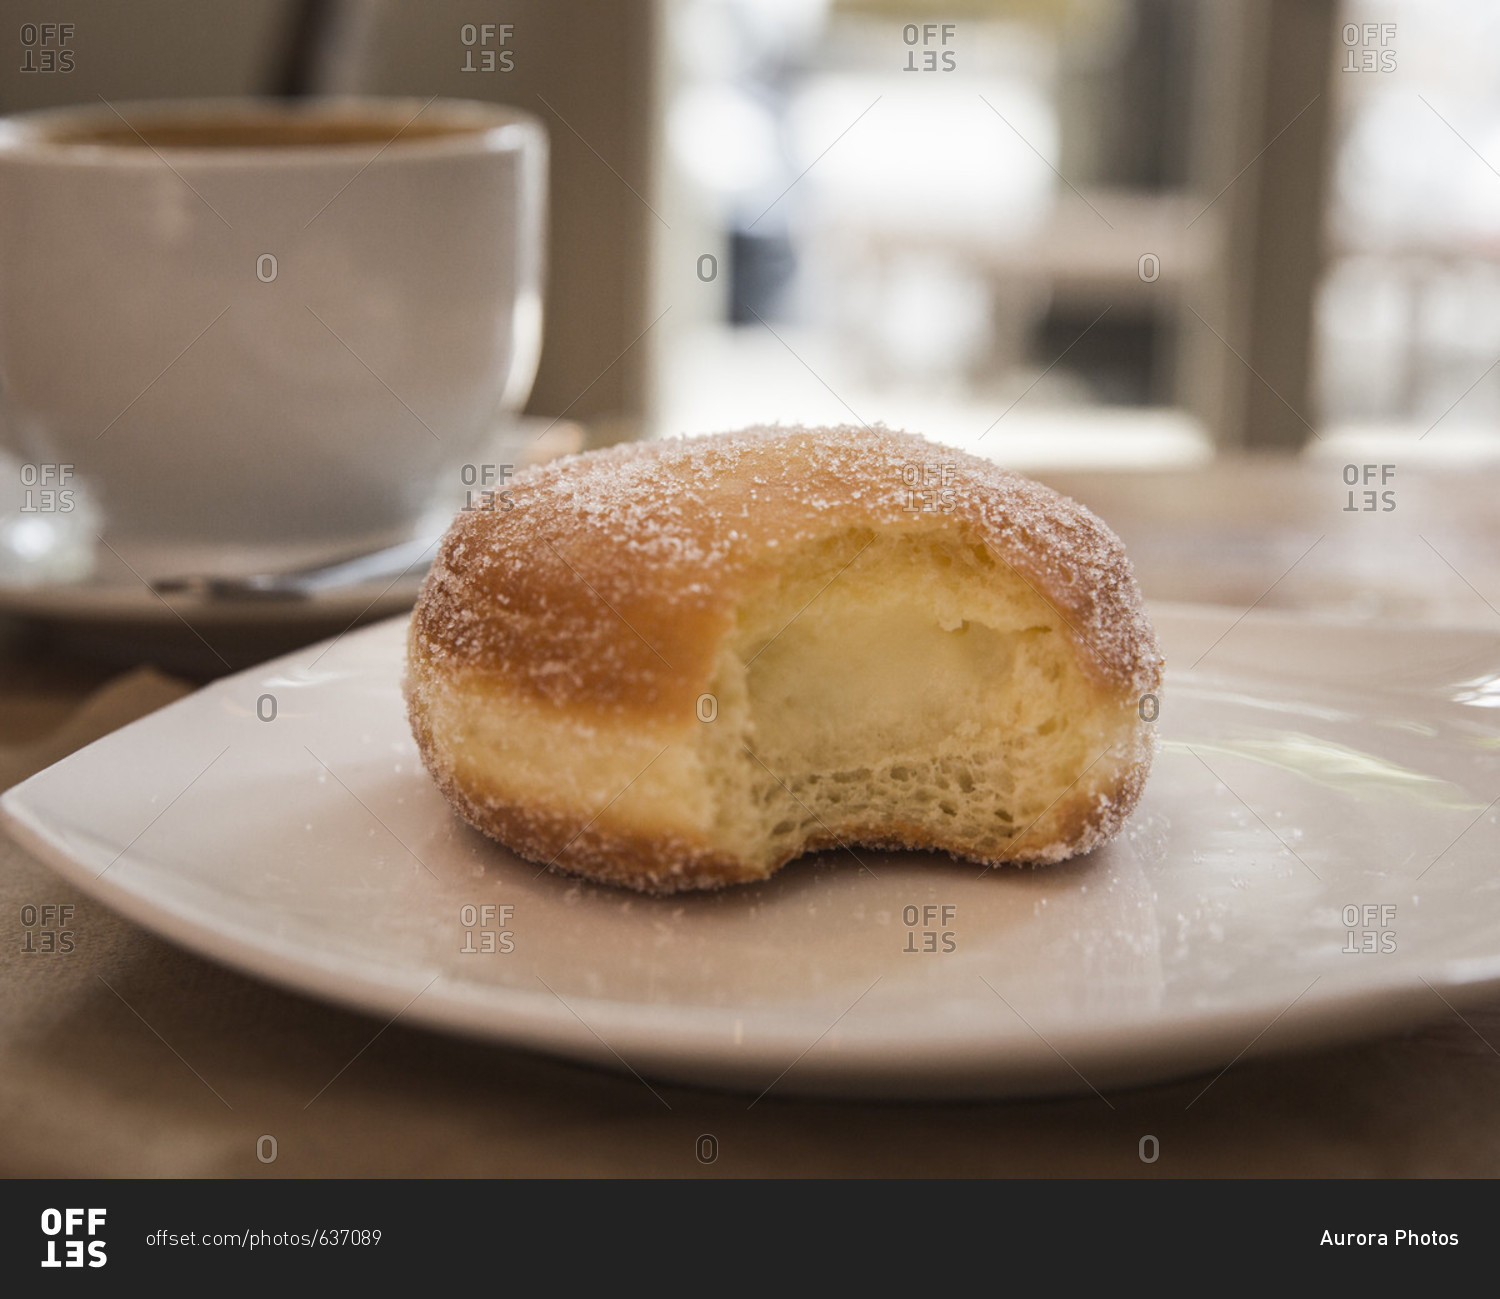 Vanilla cream doughnut with missing bite on white plate and coffee in background, Brooklyn, New York City, USA